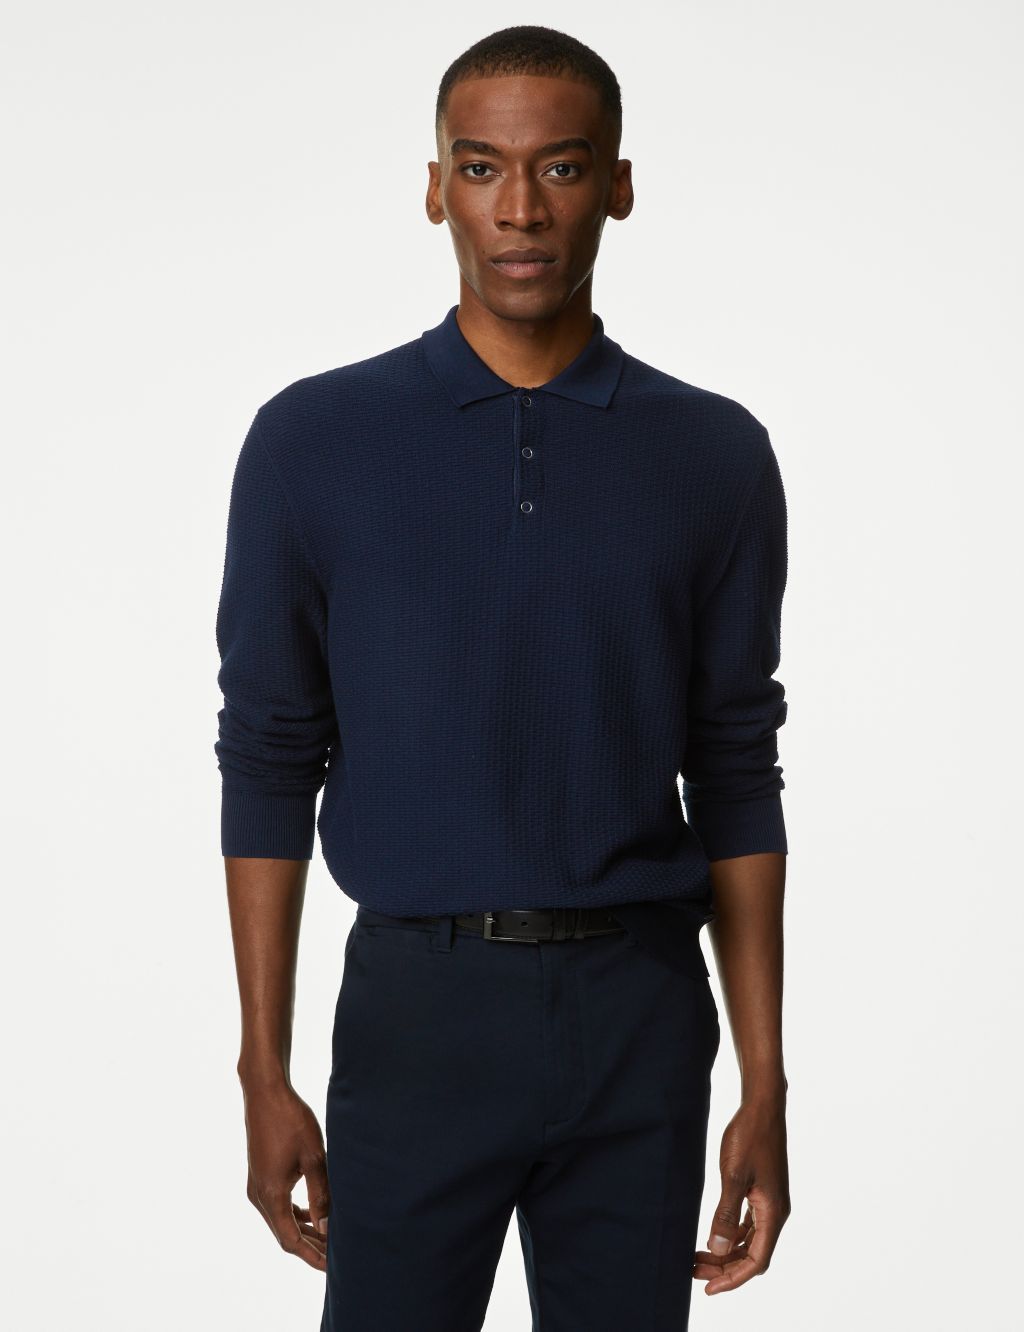 Men's Knitted Polo Shirts | M&S